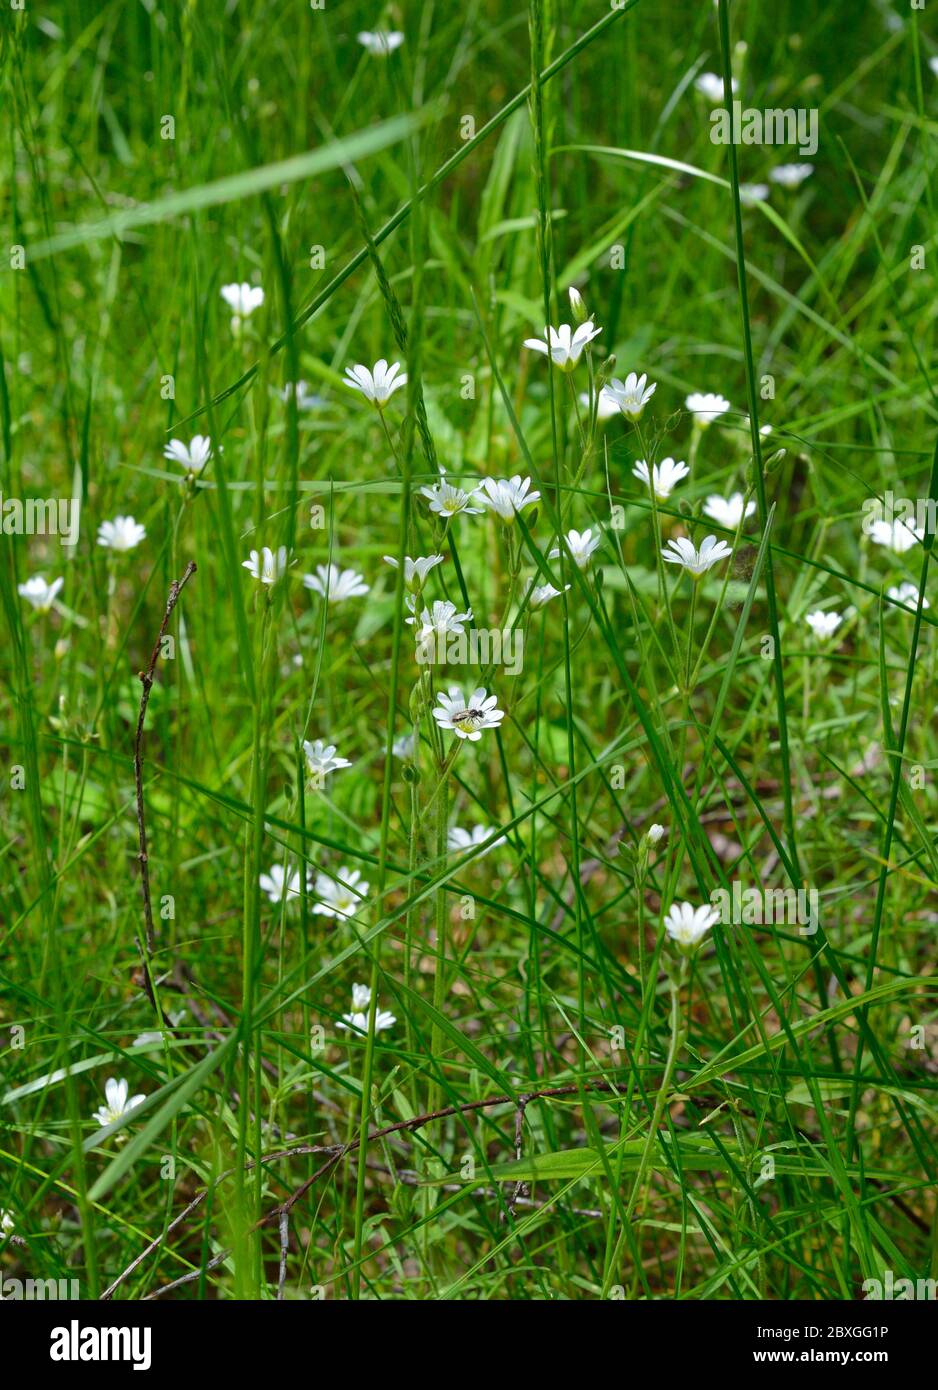 Cerastium fontanum, also called mouse-ear chickweed, common mouse-ear, or starweed. Stock Photo